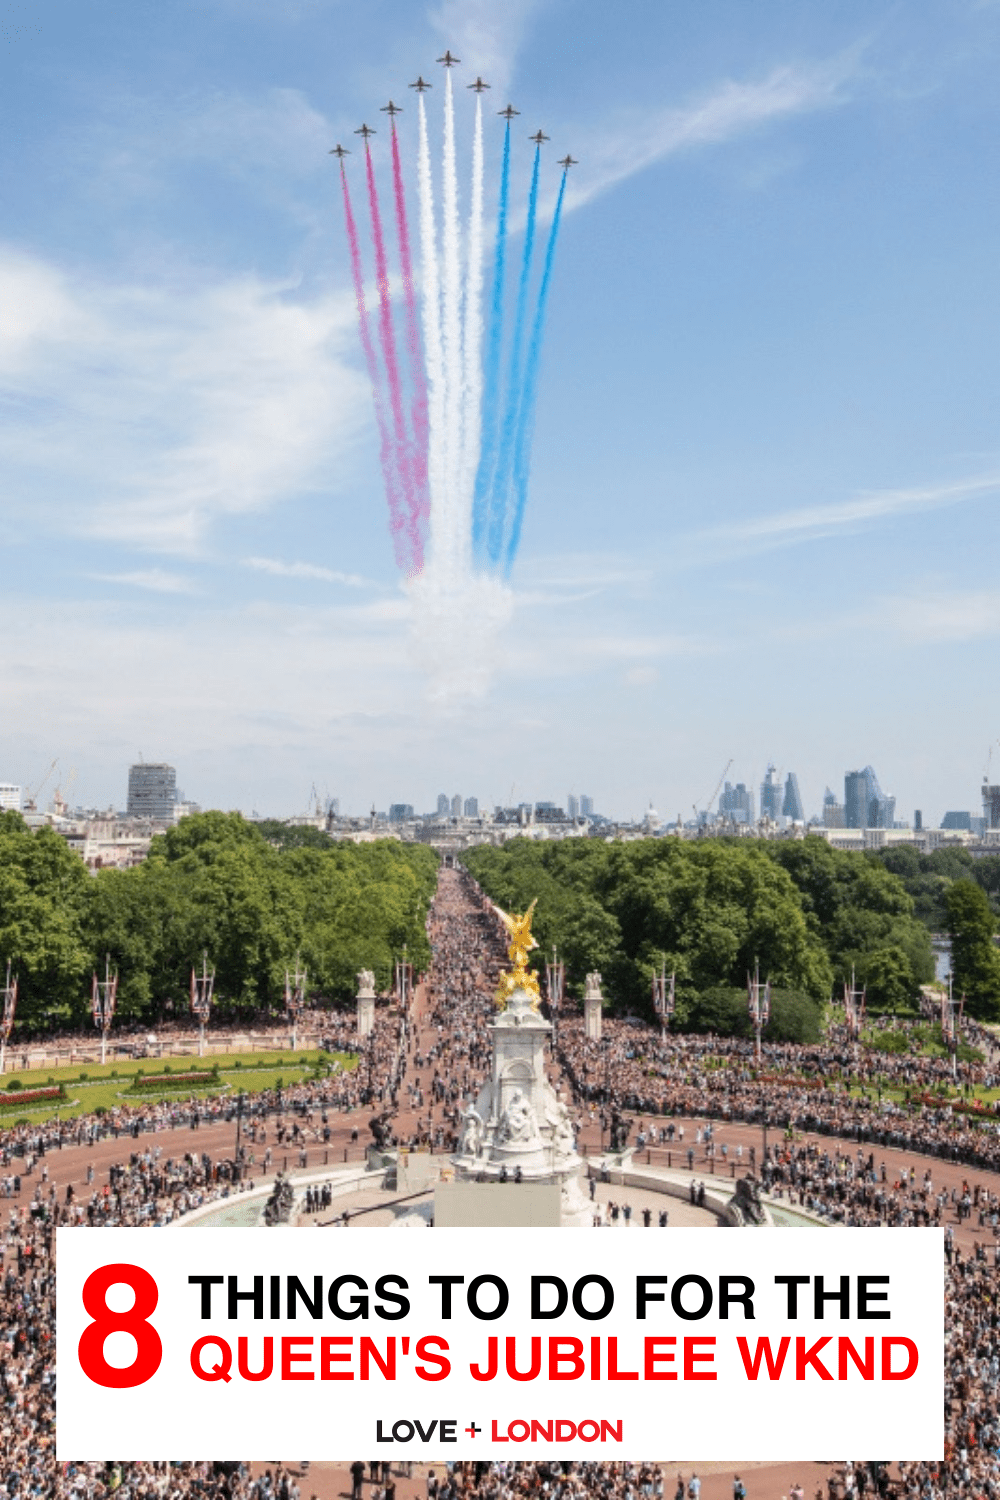 Things to do for The Queen's Jubilee Weekend